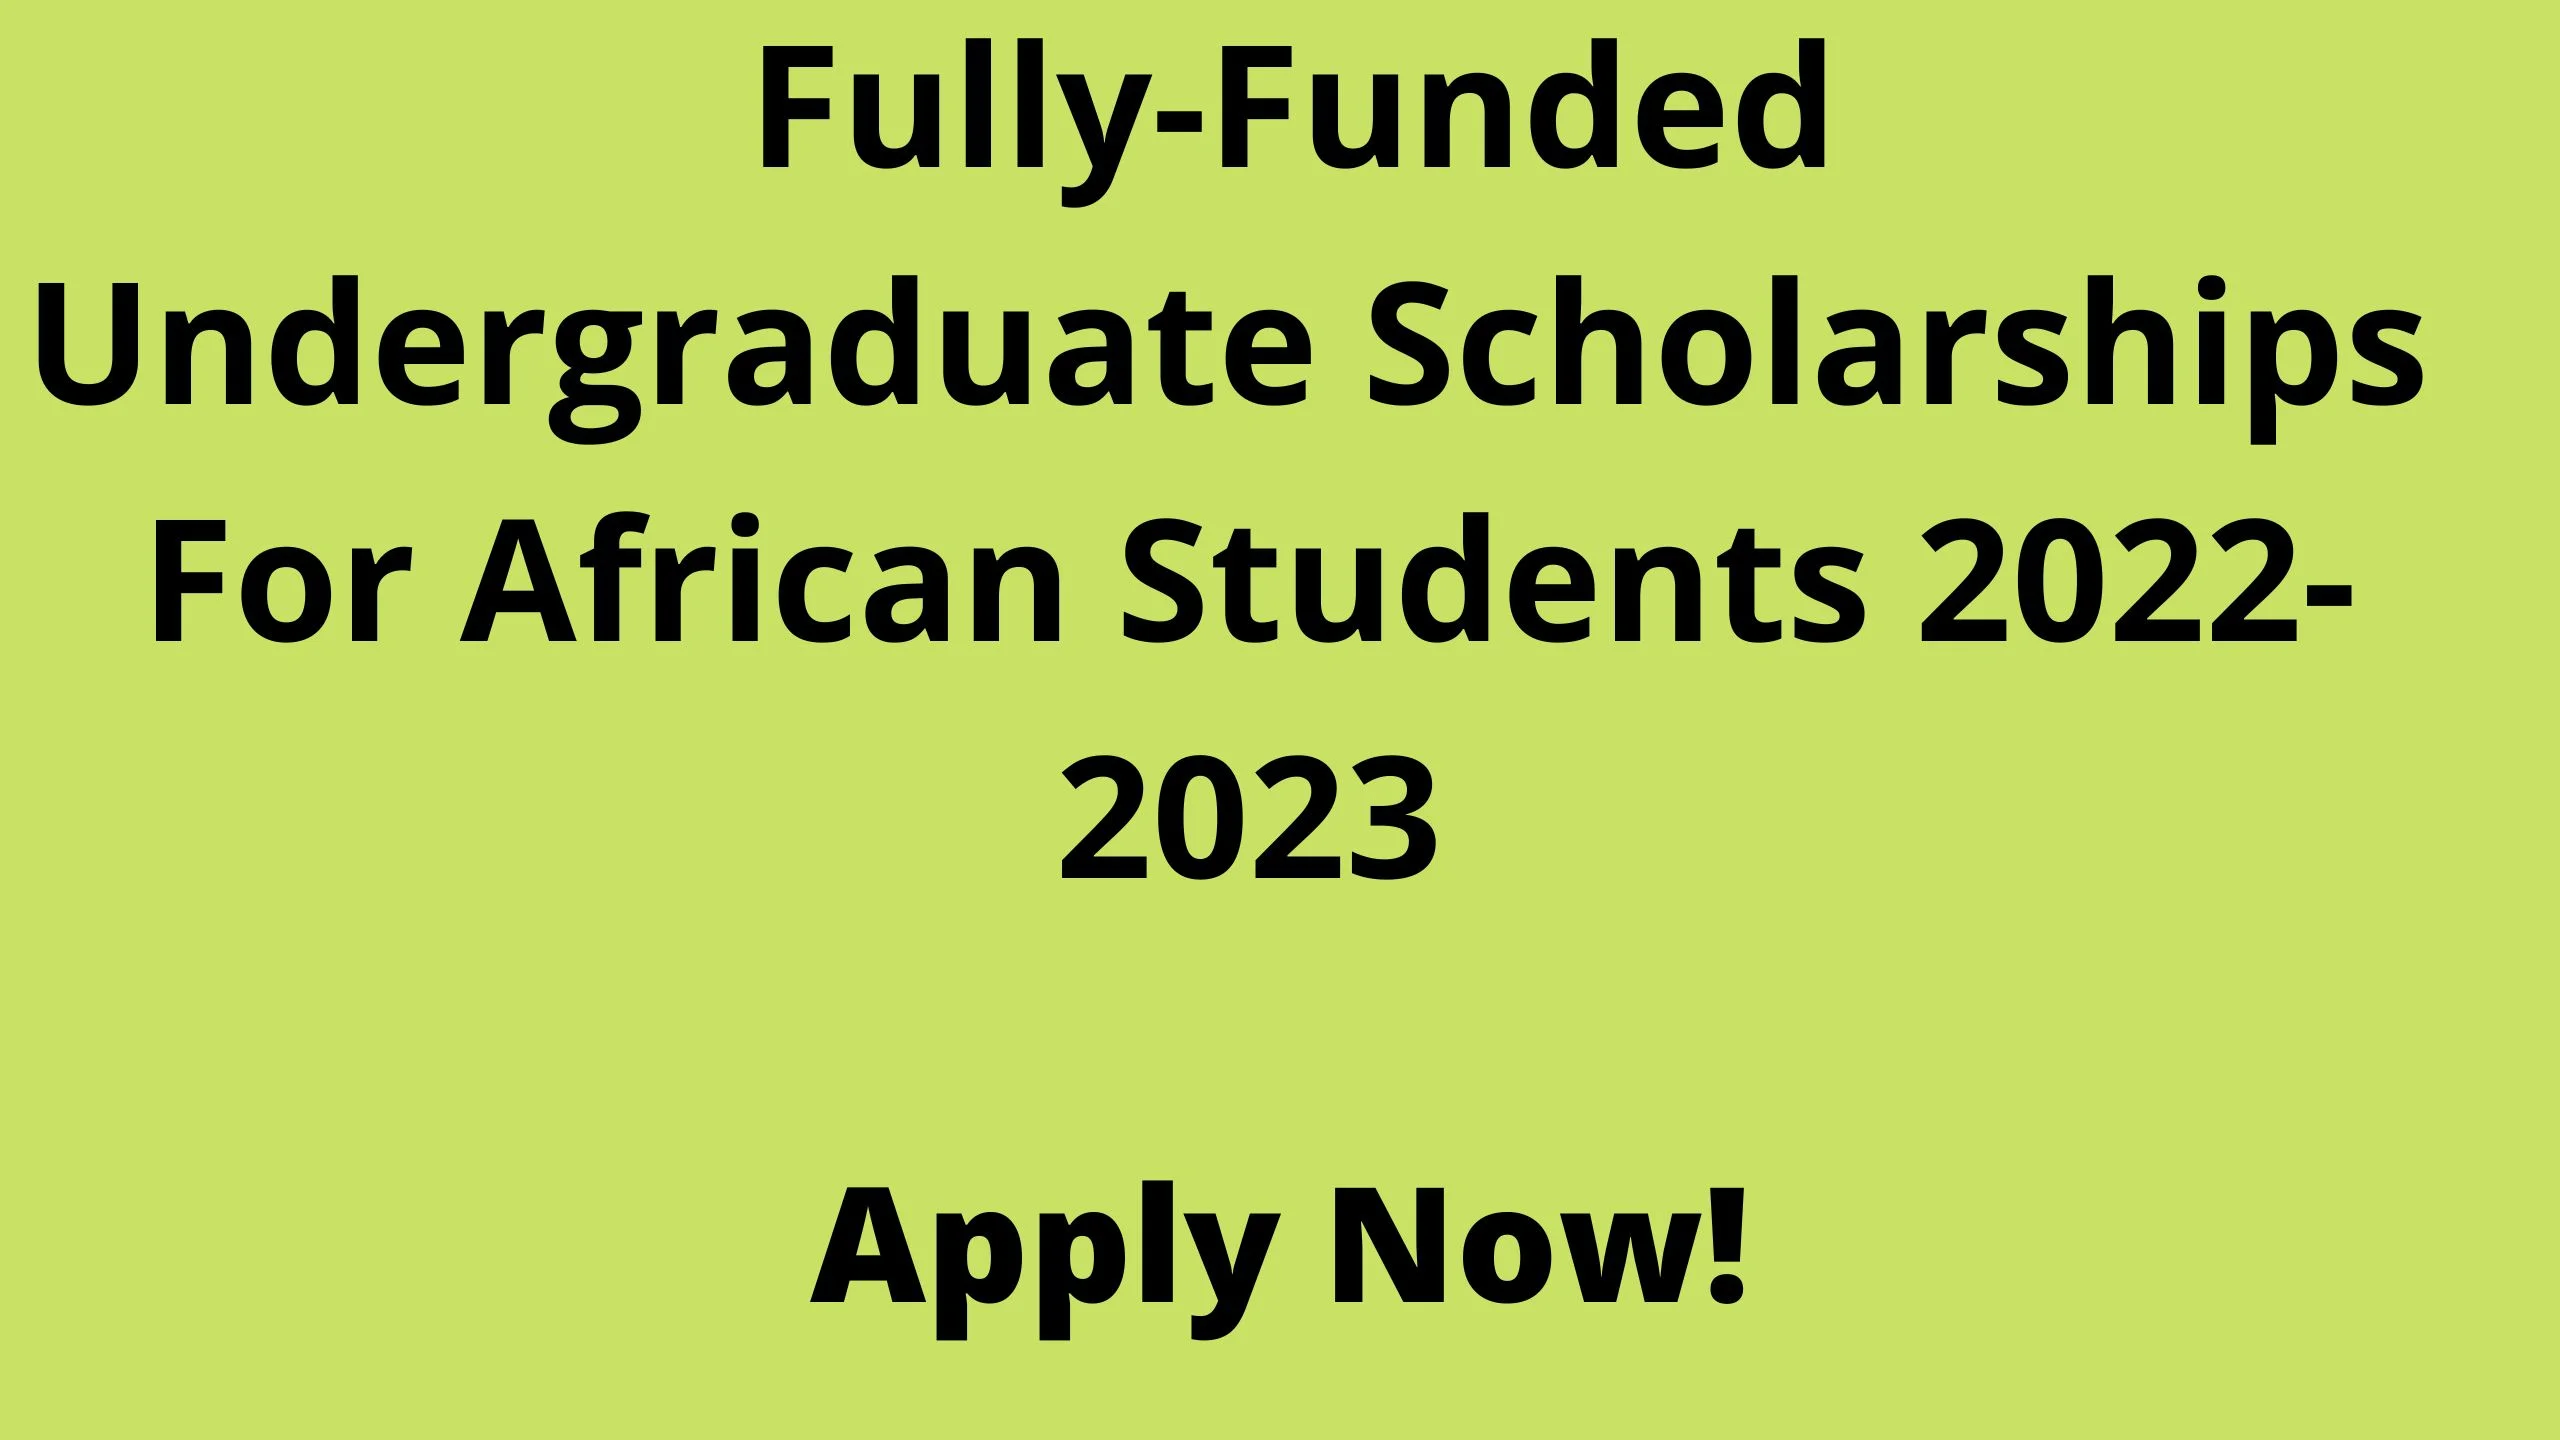 Fully-Funded Undergraduate Scholarships For African Students 2022-2023